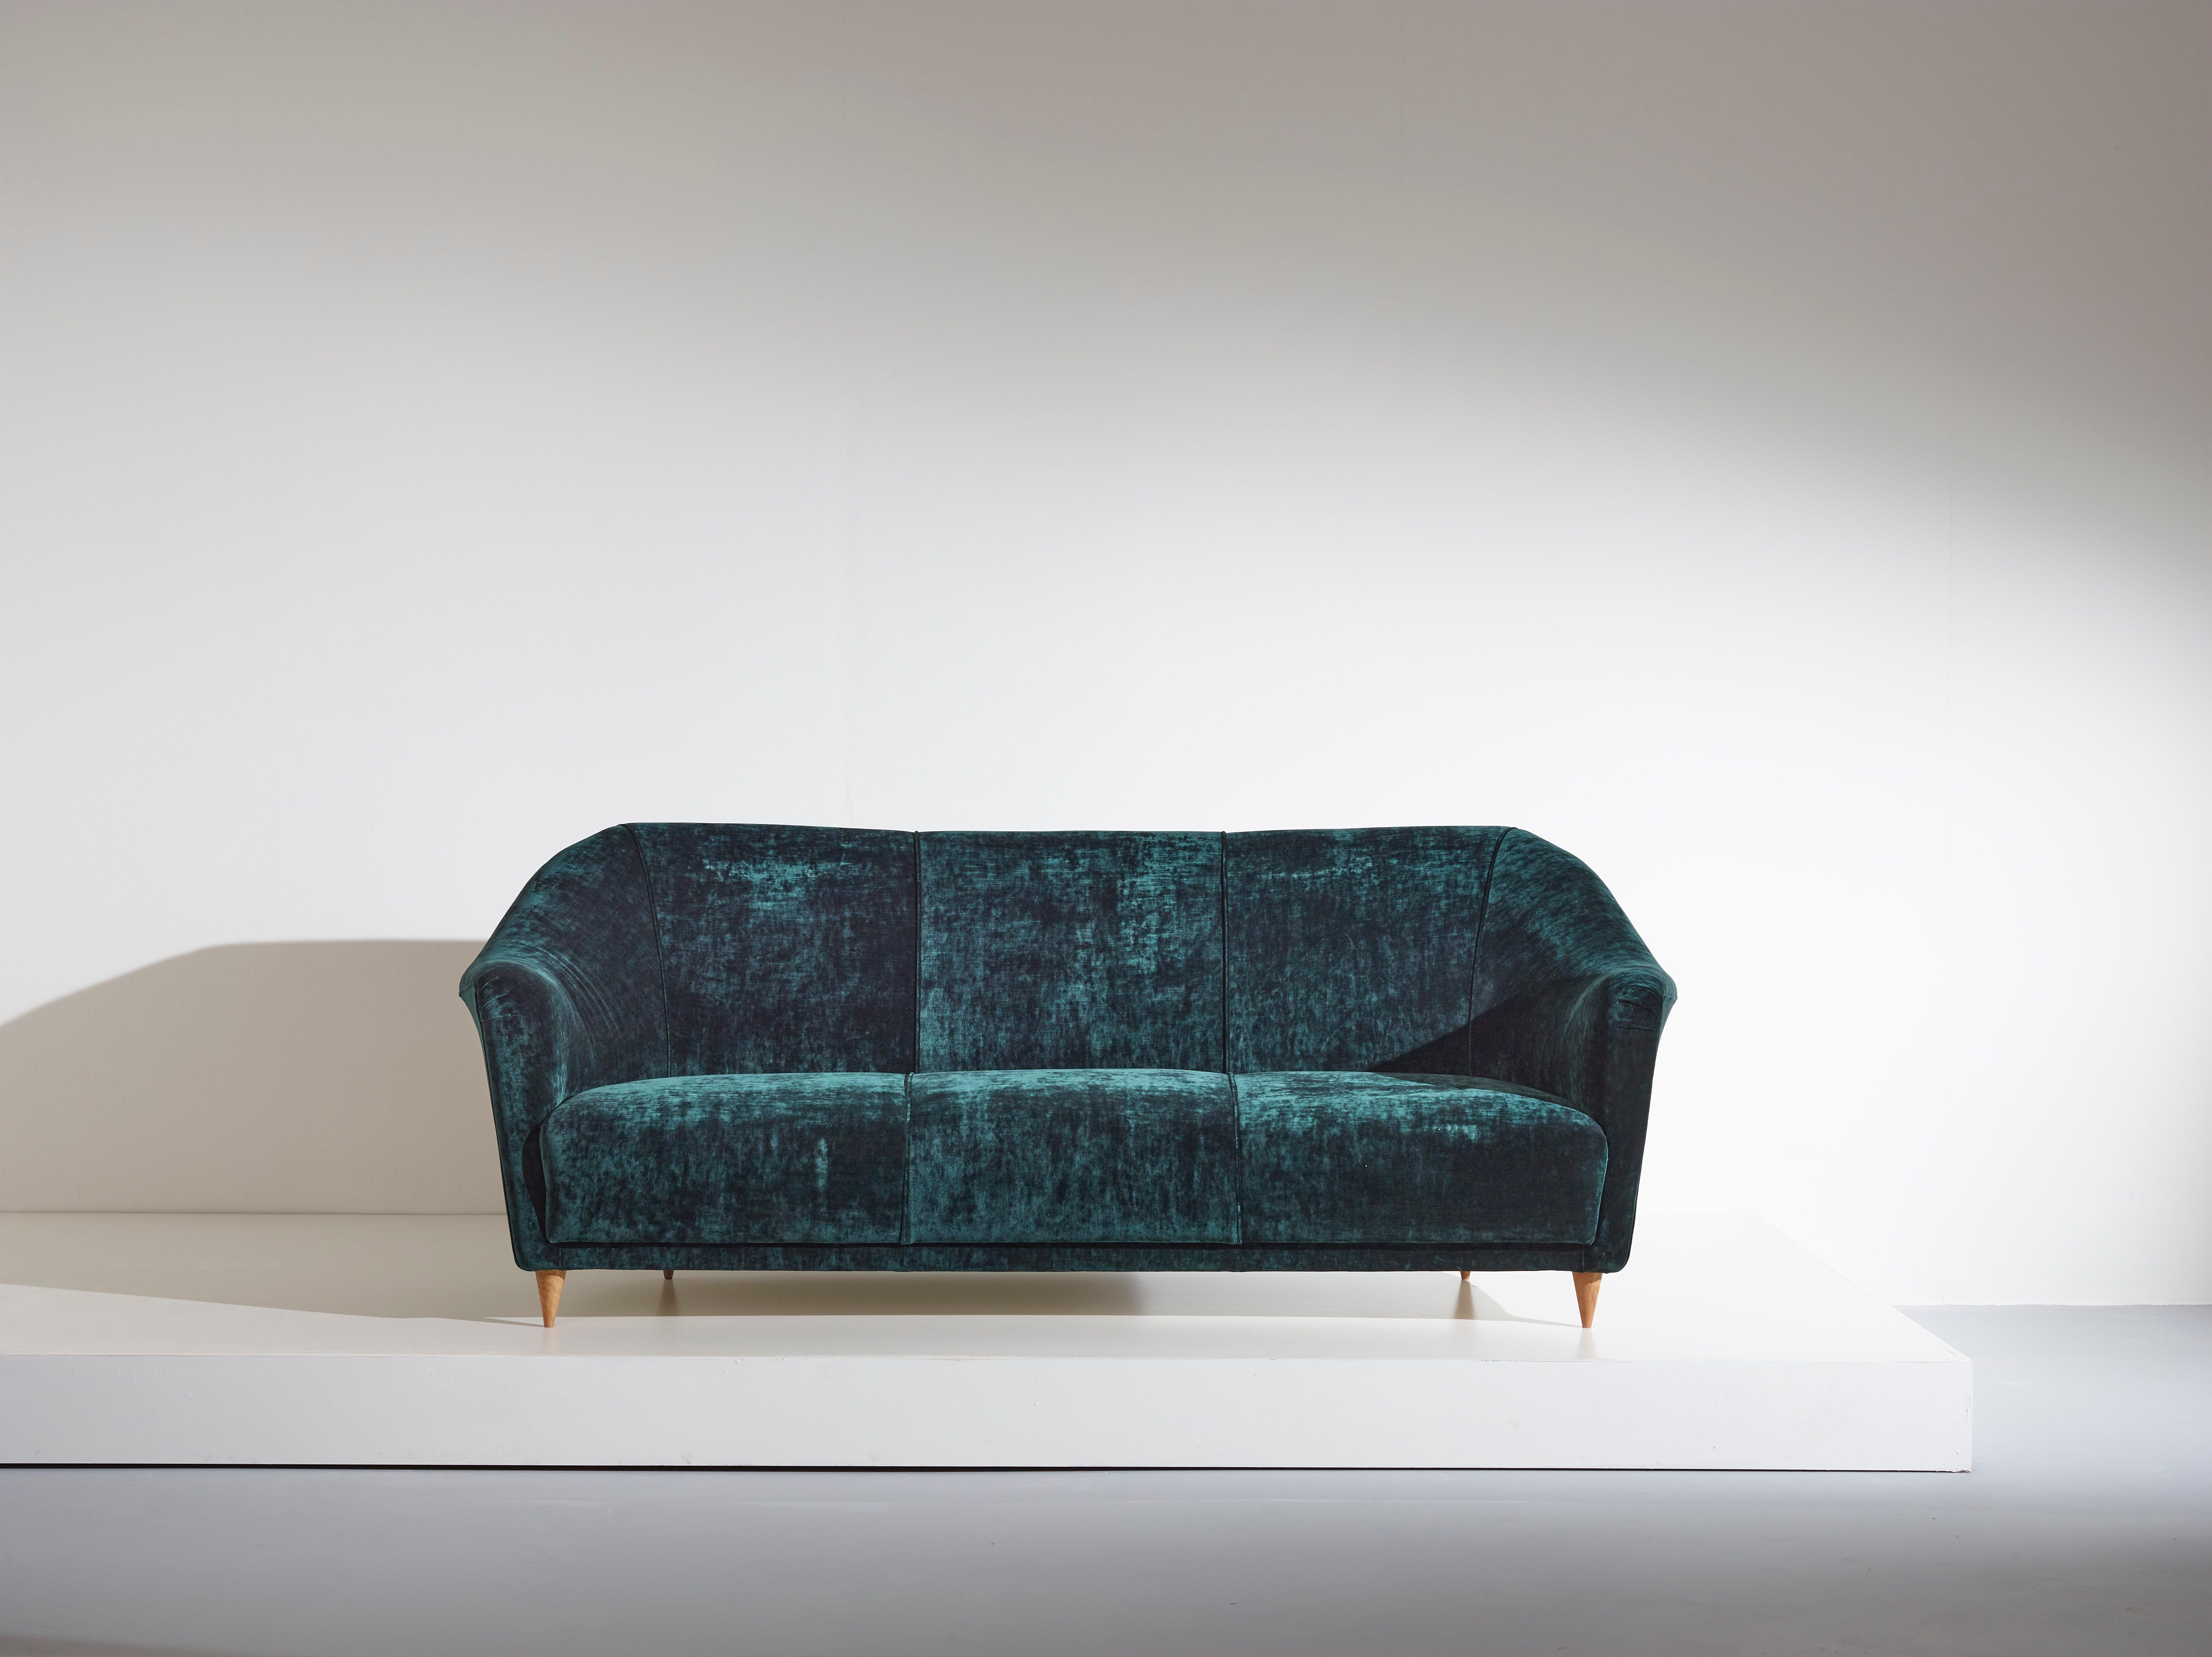 An extremely stylish and slightly curved three seater sofa attributed to Ico Parisi and made by Ariberto Colombo. It has been completely restored and reupholstered in a blue petroleum mottled velvet.

Dimensions: 100 x 210 x 86 cm